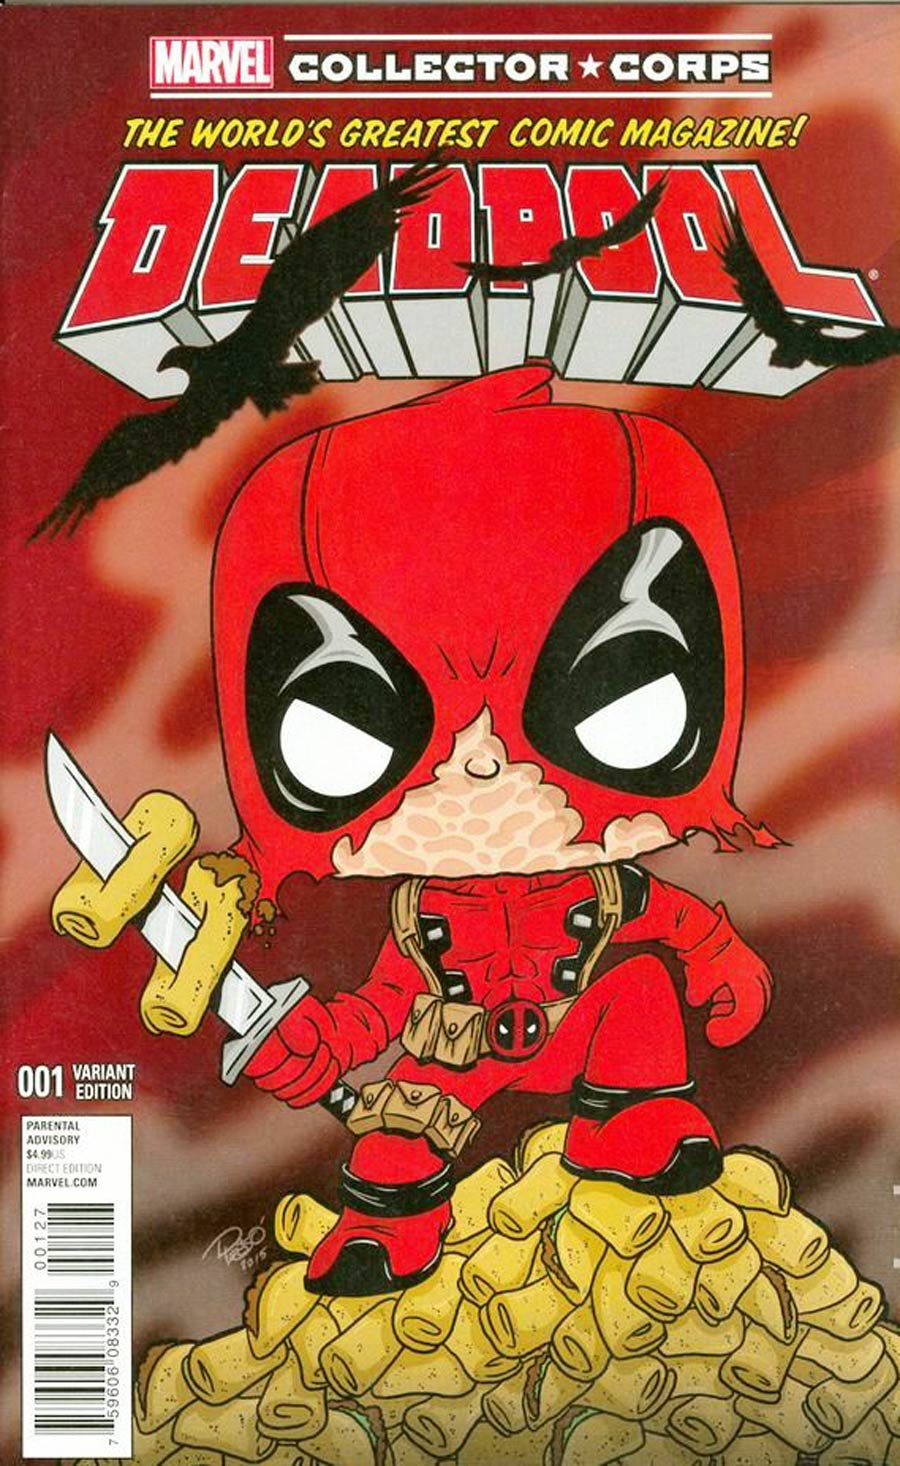 Deadpool Vol 5 #1 Cover O Marvel Collectors Corps Variant Cover